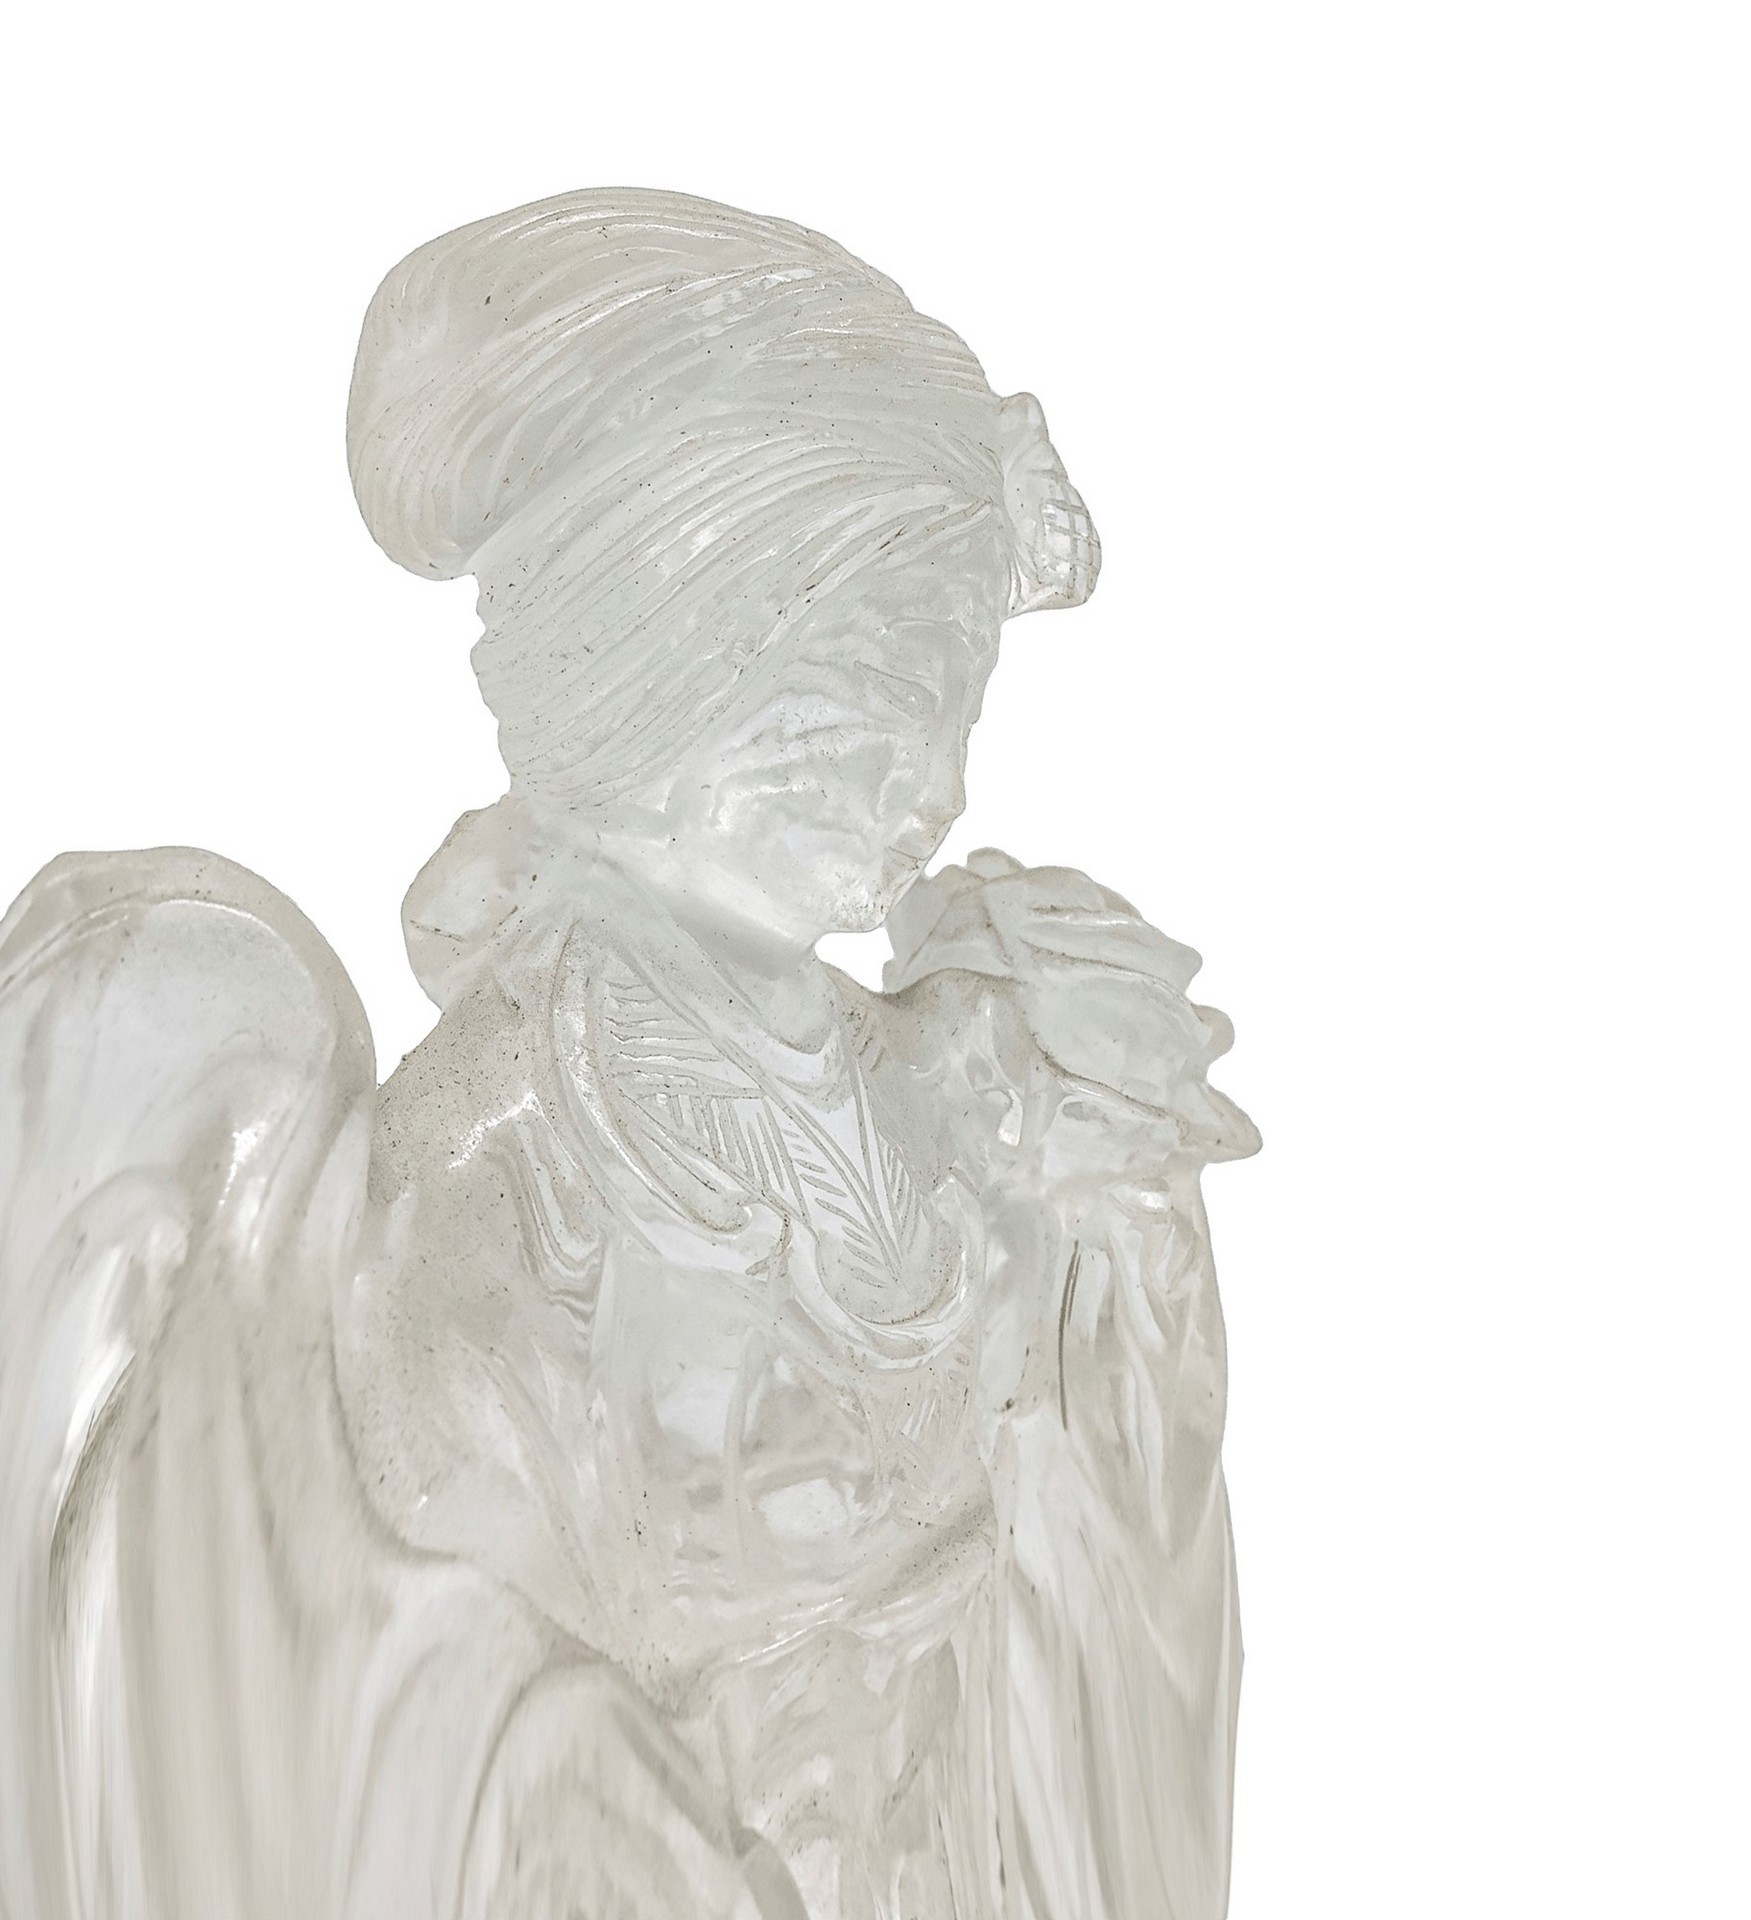 Transparent hard stone sculpture depicting Guanyin., 20th century - Image 2 of 4